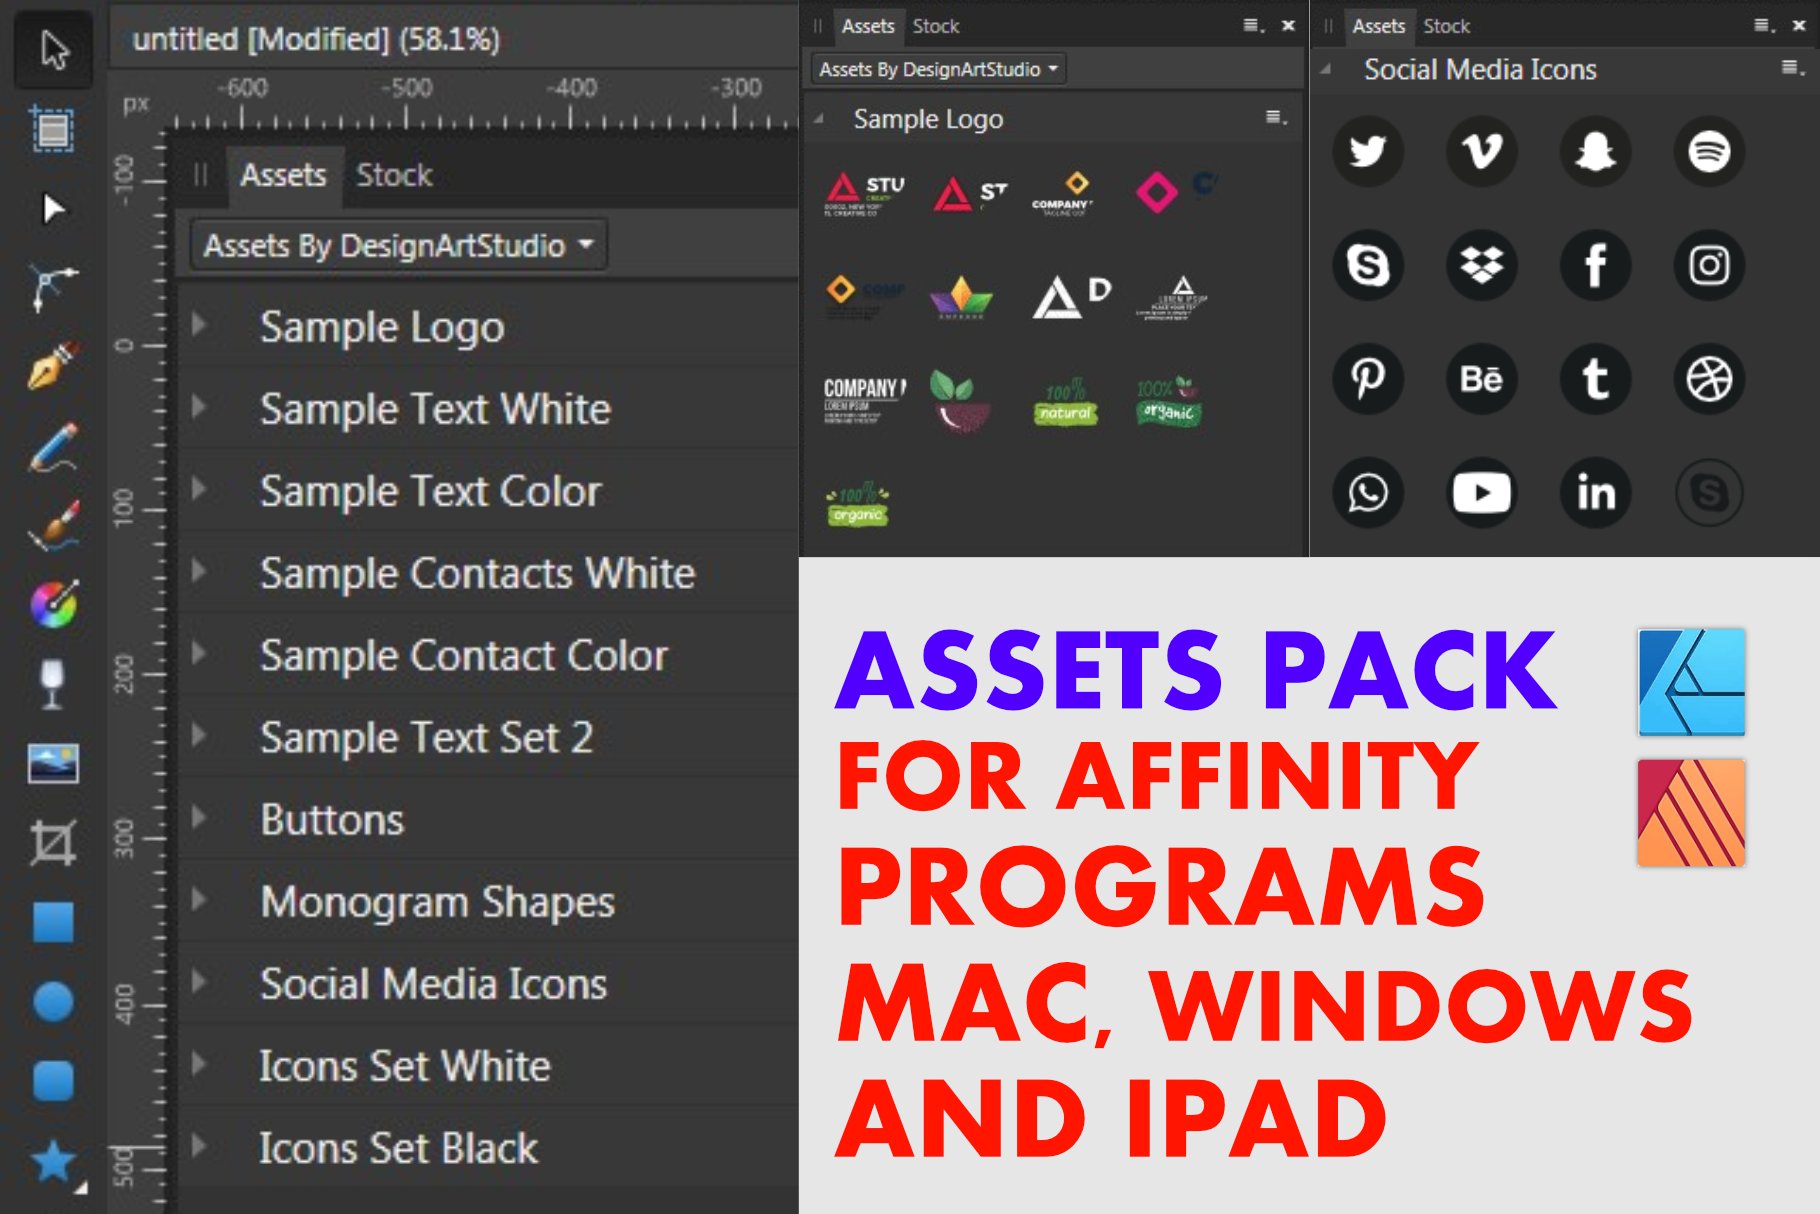 Affinity Assets cover image.